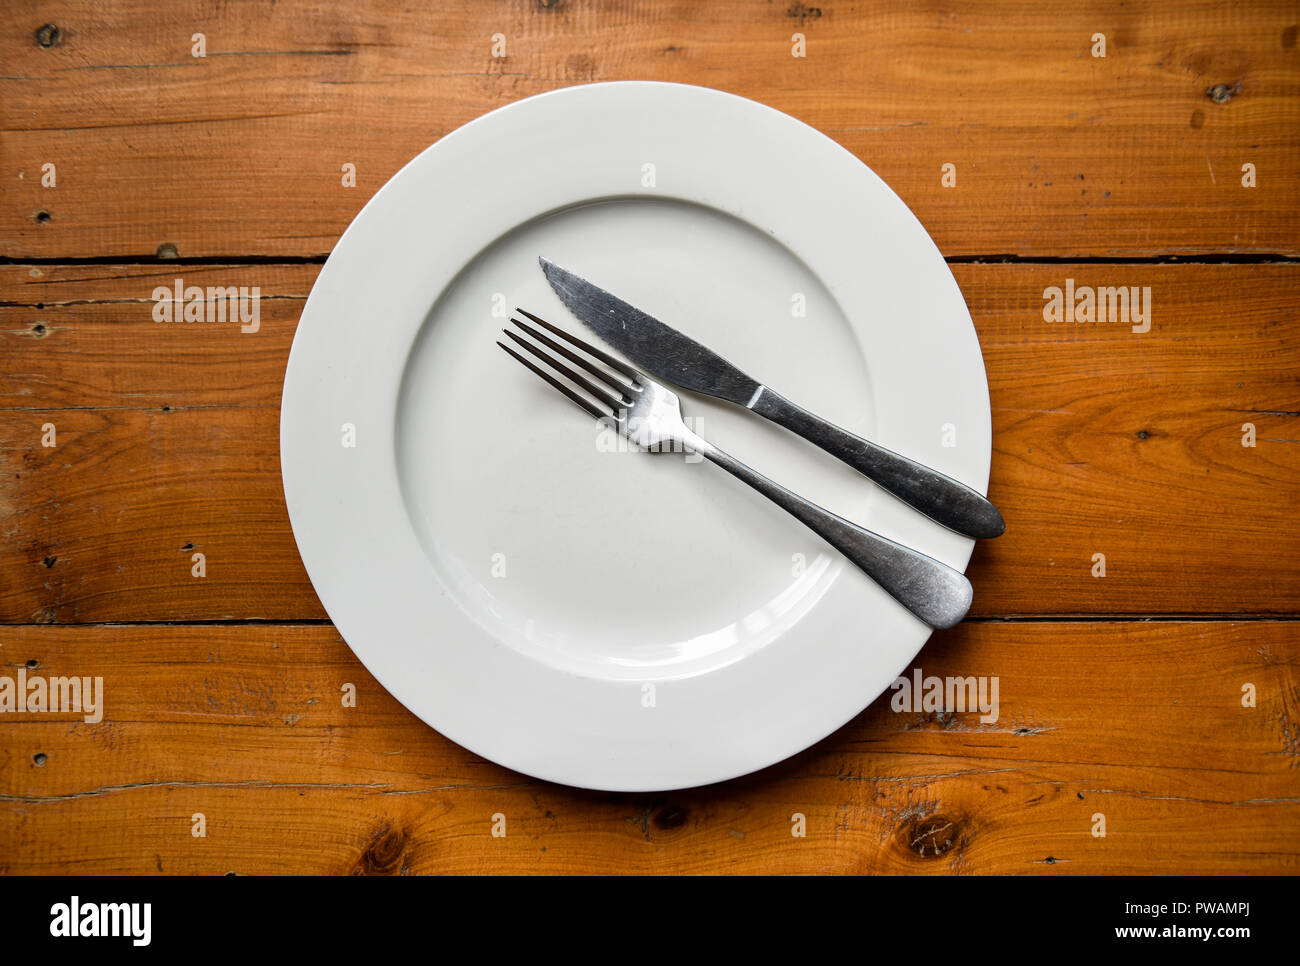 Top view of silver fork and knife on round white plate on wooden table reffering that dinner is finished Stock Photo